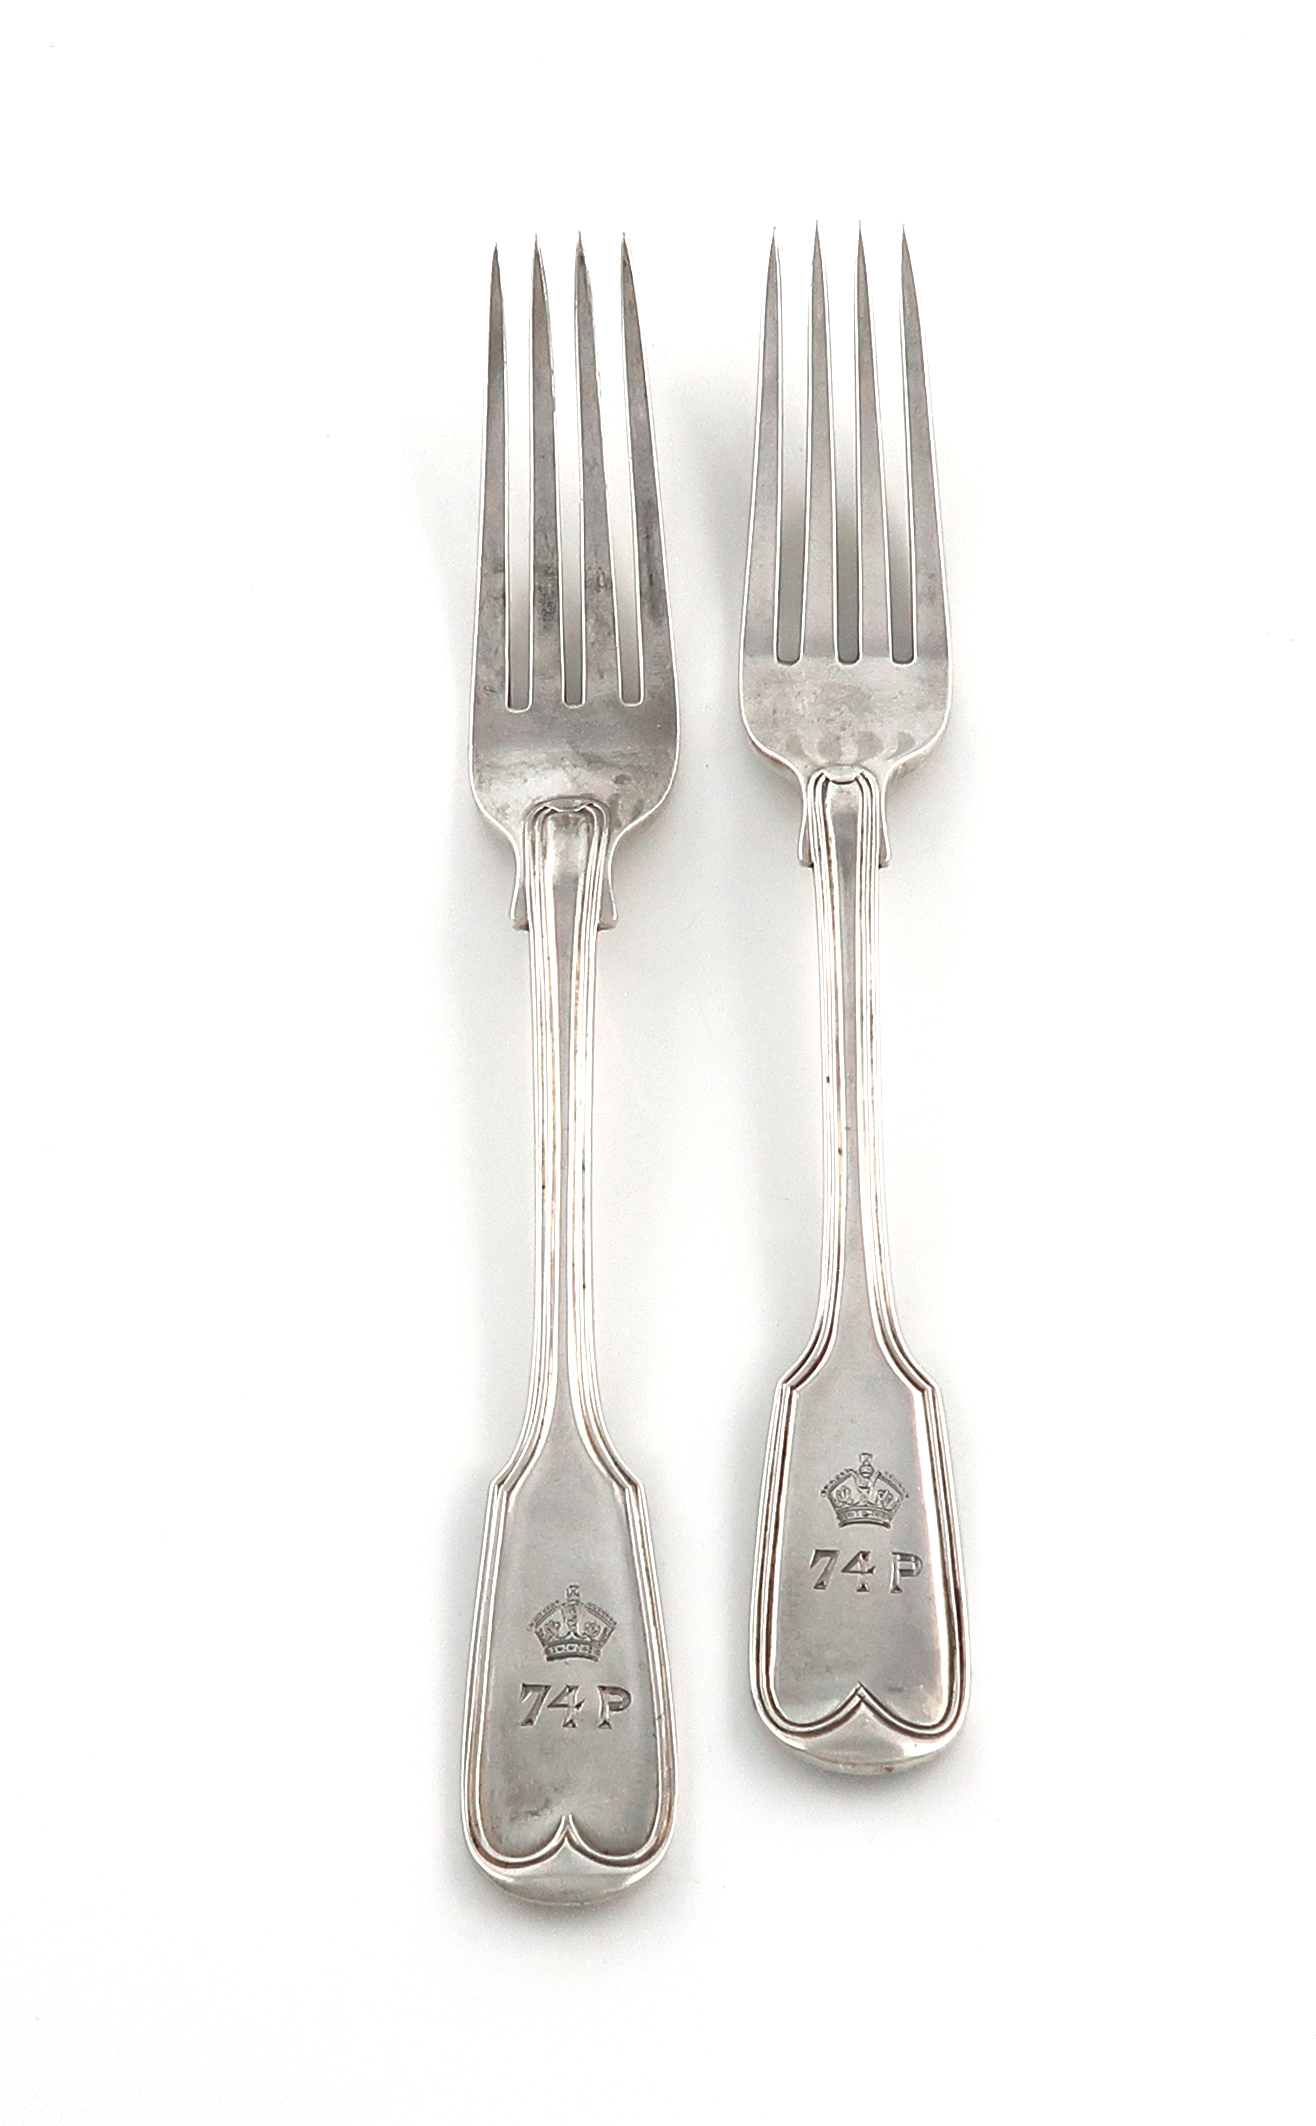 Two Victorian and Edwardian silver Fiddle and Thread pattern table forks, The 74th Punjabis, by J